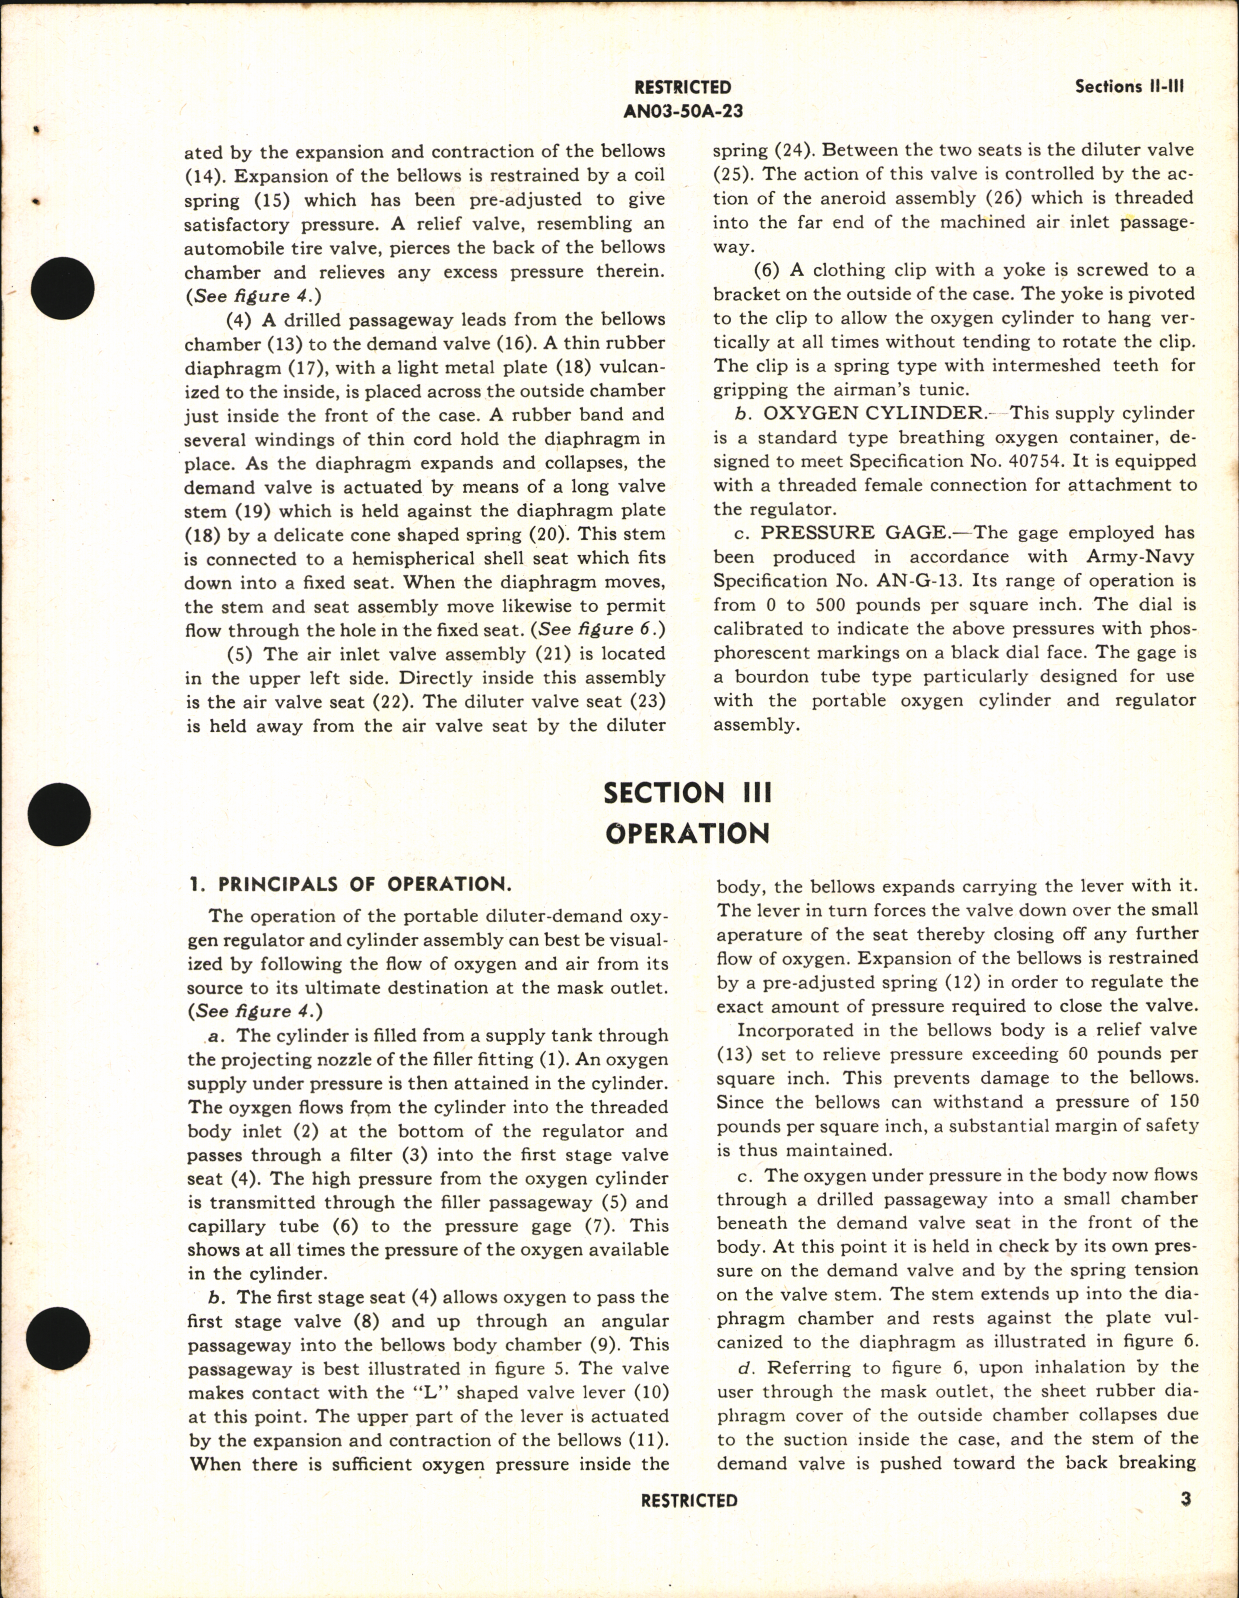 Sample page 7 from AirCorps Library document: Handbook of Instructions with Parts Catalog for Type A-15 Portable Diluter Demand Oxygen Regulator